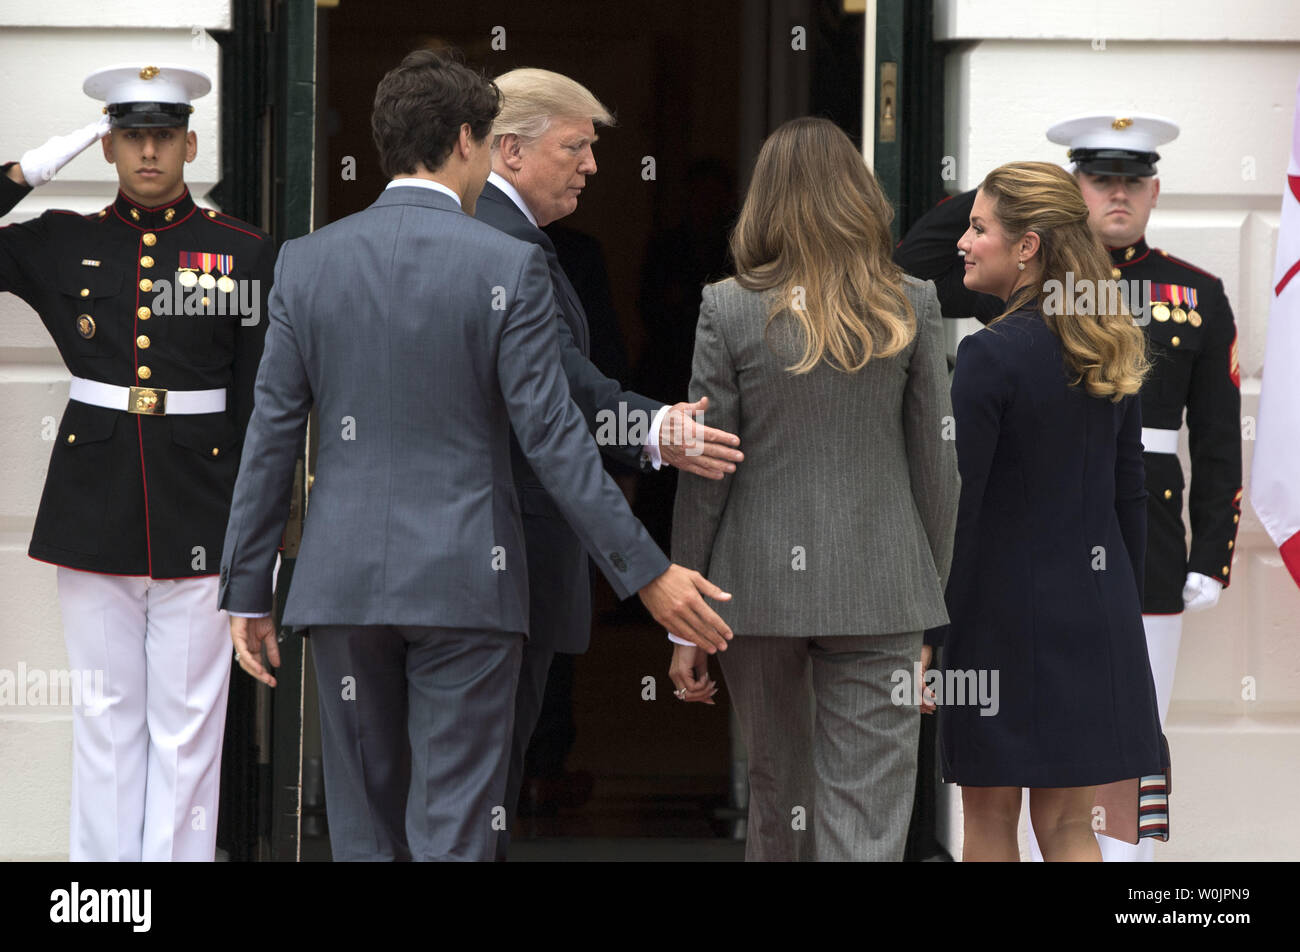 President Donald Trump (2nd-L), First Lady Melania Trump (2nd-R), Canadian  Prime Minister Justin Trudeau (L) and his wife Gregoire Trudeau arrive at  the White House in Washington, D.C. on October 11, 2017.